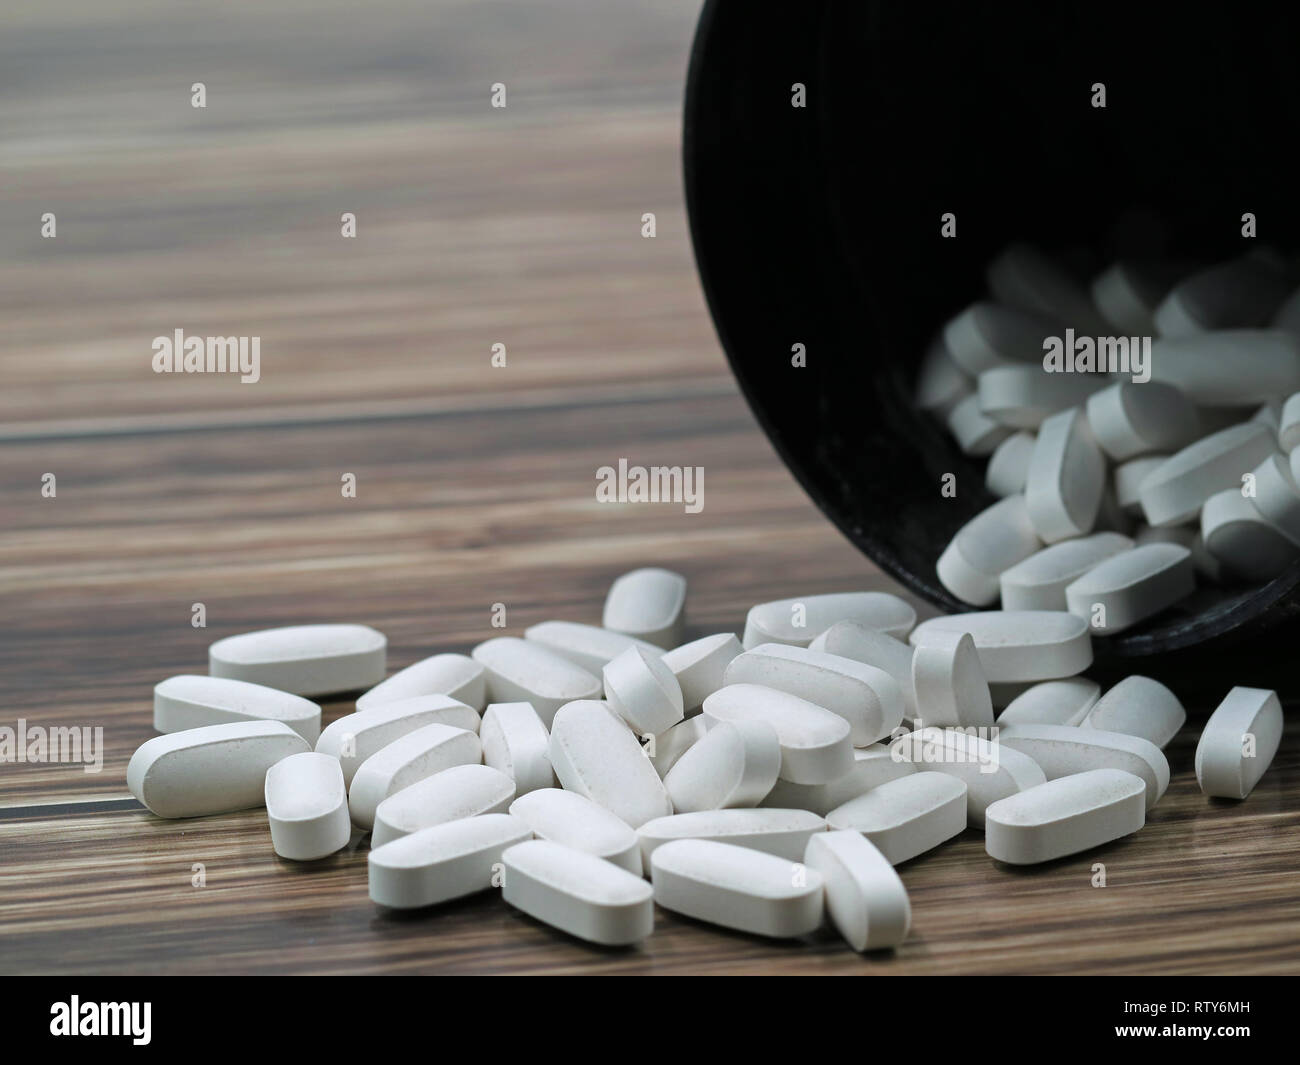 White pills spilling out of a toppled dark pill bottle on wooden ground, copy space Stock Photo